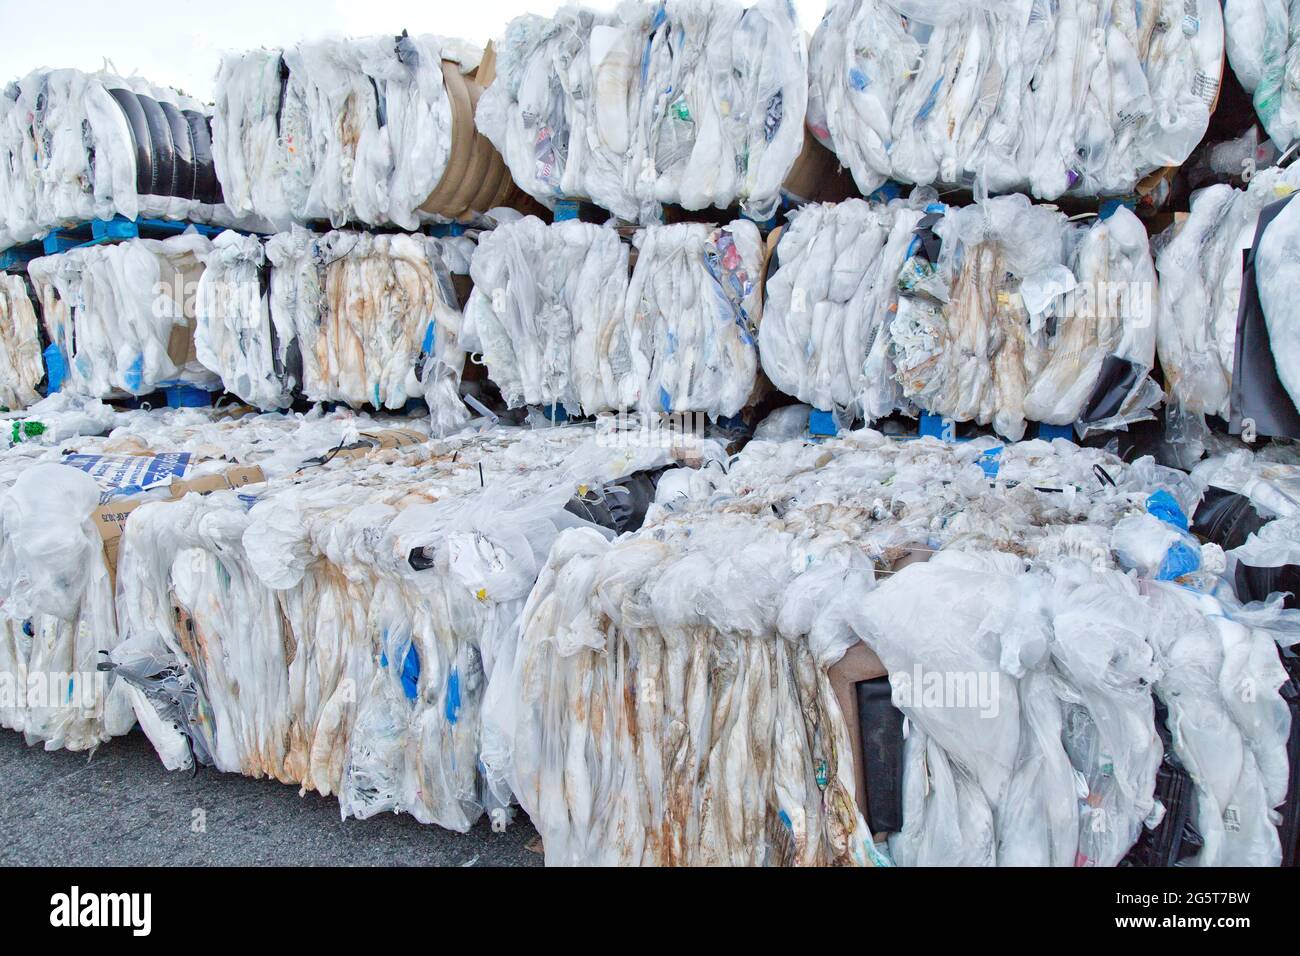 Compacted, baled plastics to be recycled. Stock Photo